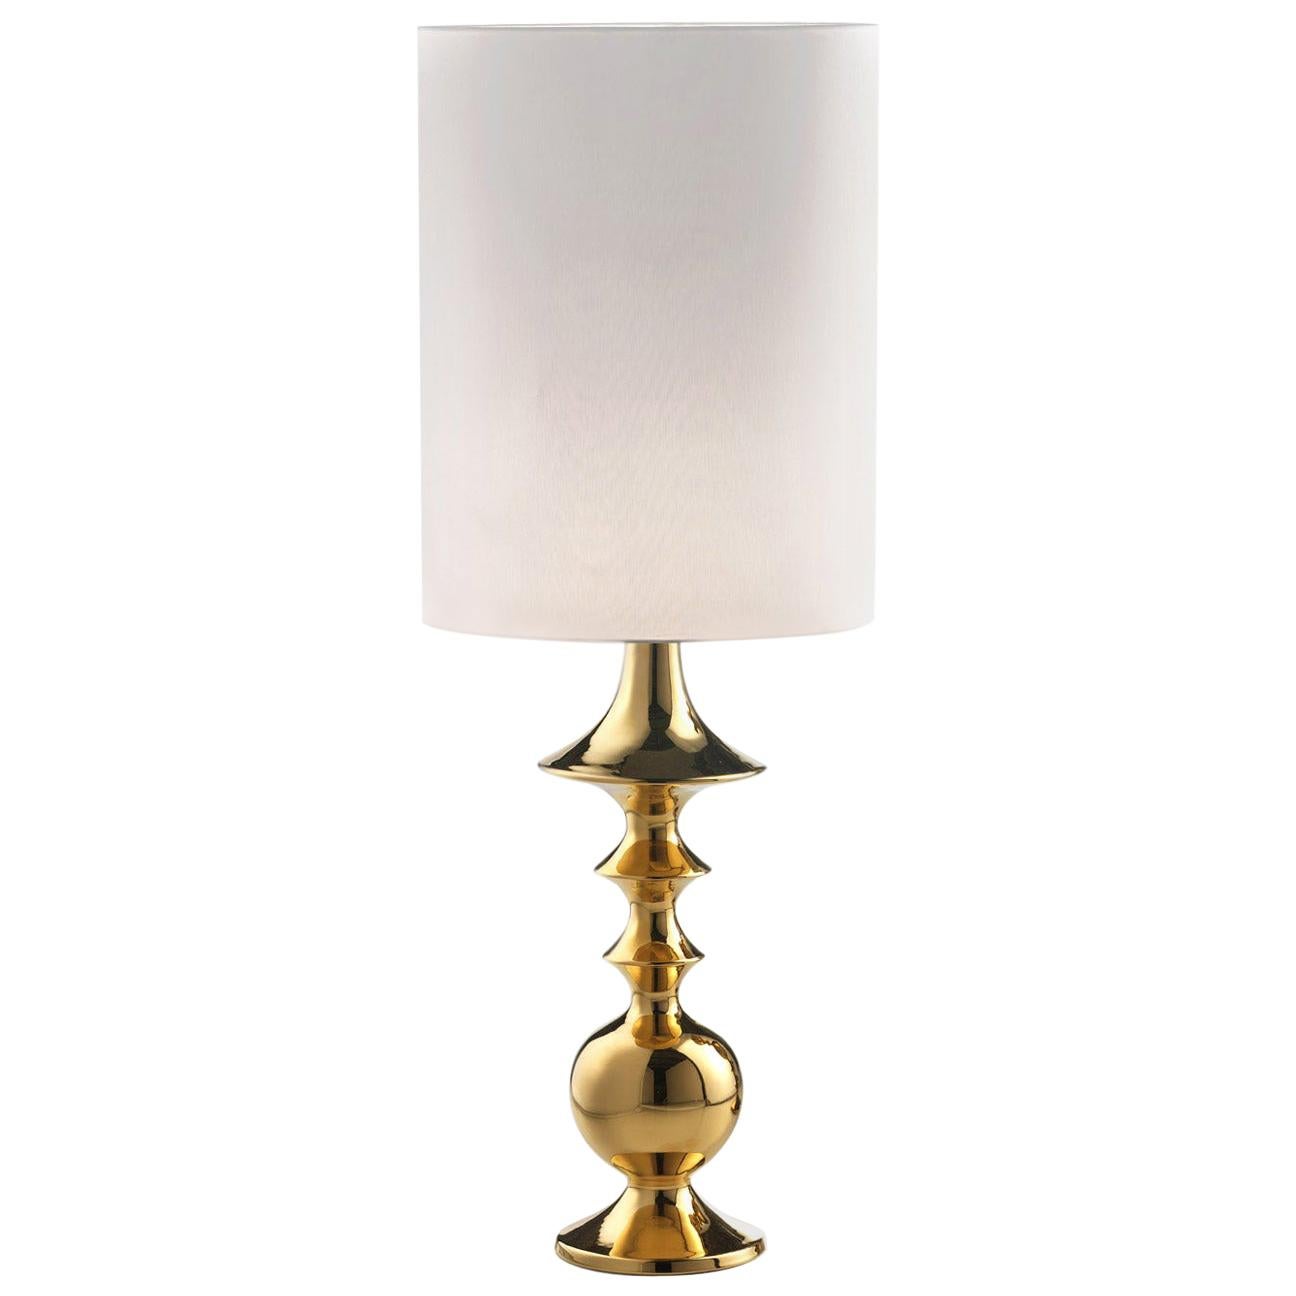 Ceramic Table Lamp "BRIX" Handcrafted in 24-Karat Gold by Gabriella B. in Italy